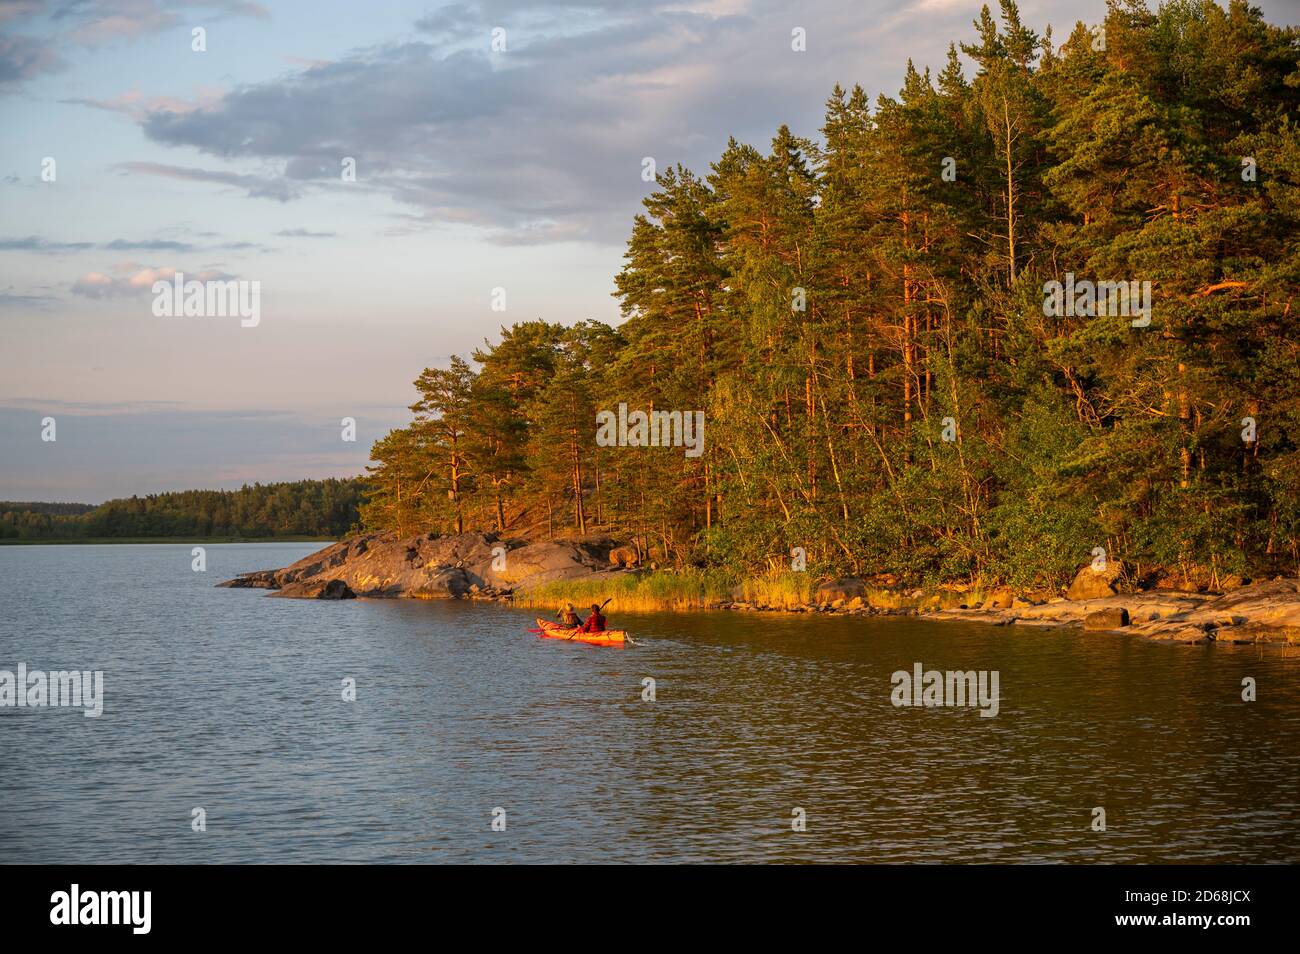 Landscape of the region of Southwest Finland where there are thousands of islands, at the crossing of the Gulf of Finland and the Gulf of Bothnia. Sai Stock Photo